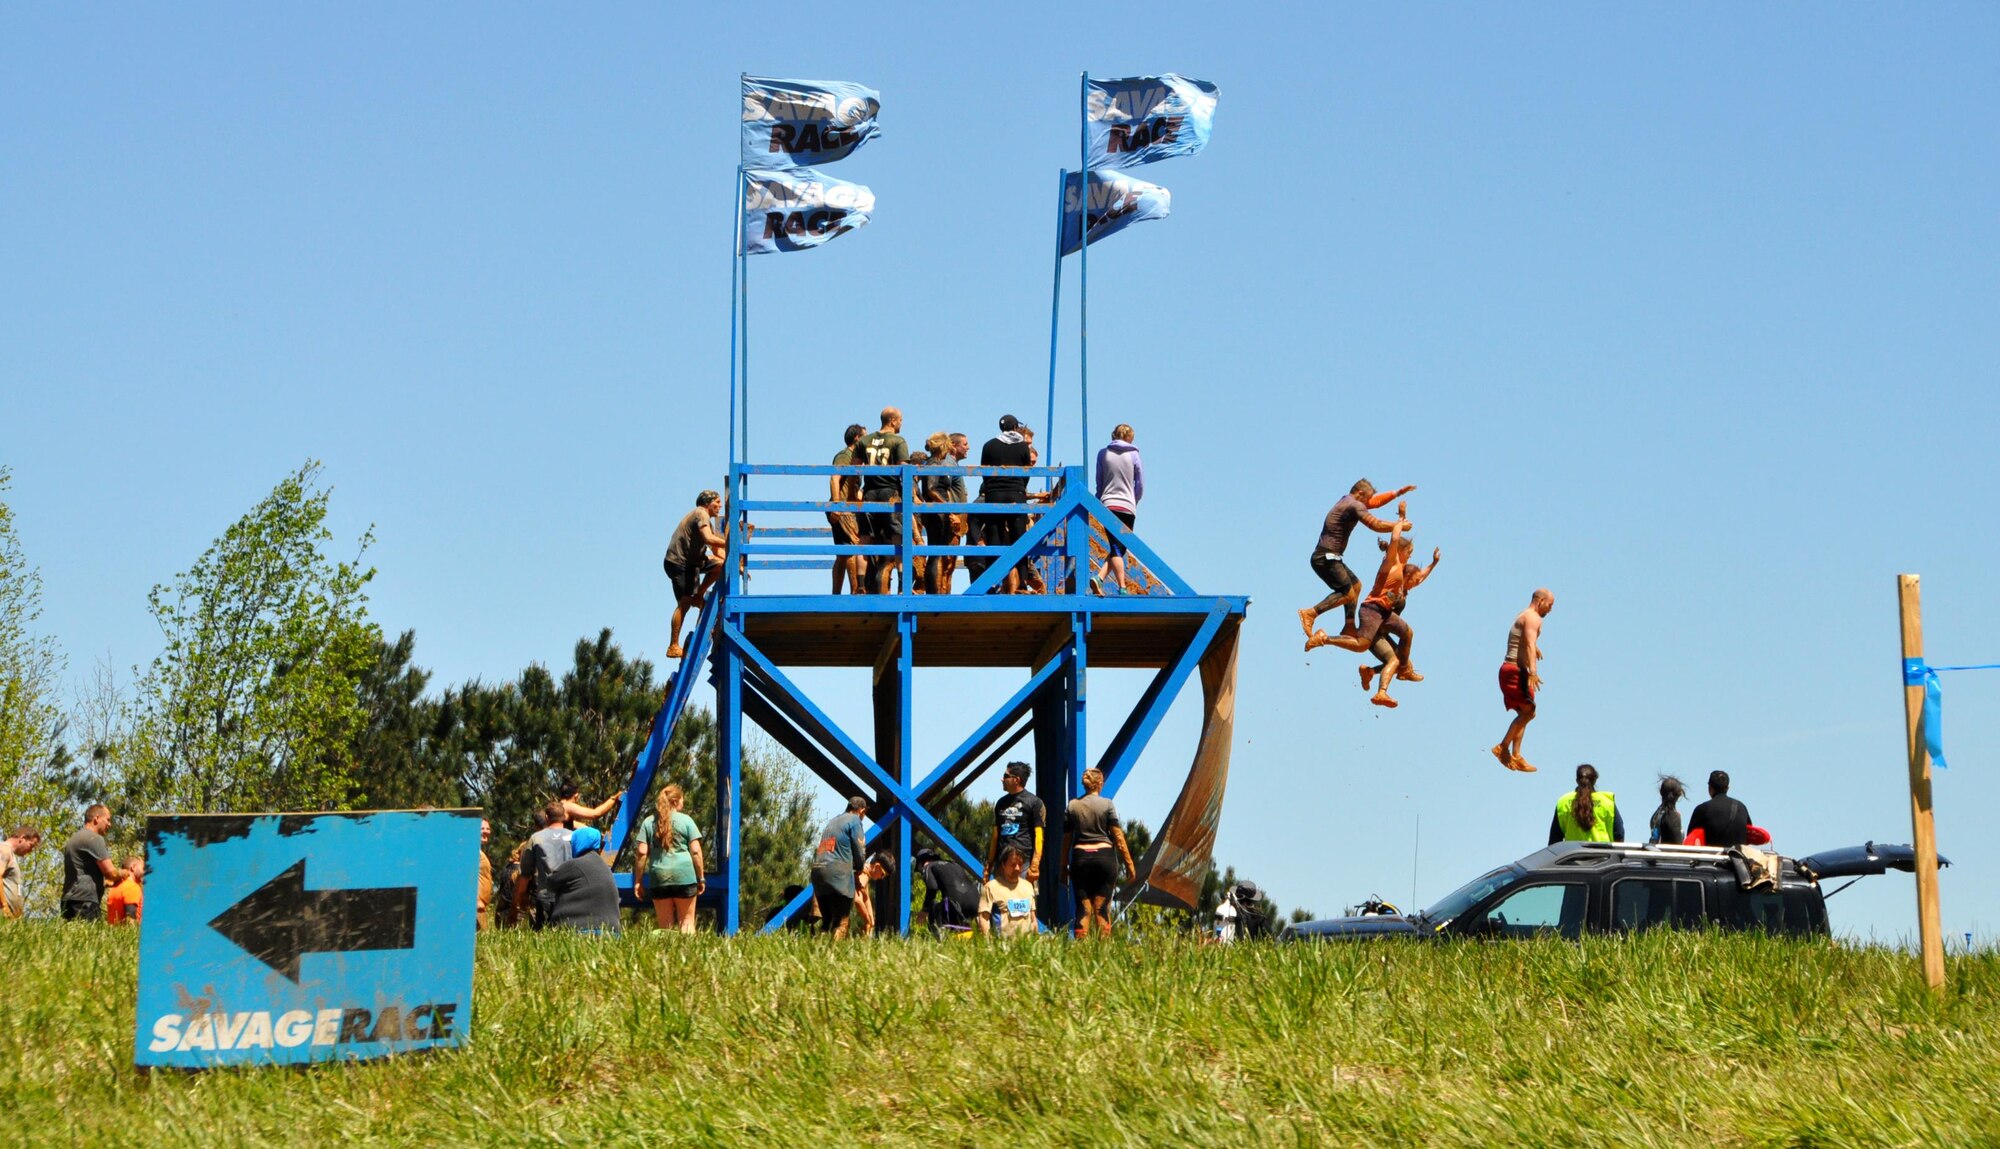 Members of Dobbins Air Reserve Base, Ga. and many other racers from Georgia take a leap of faith at Davy Jones Locker obstacle at the Savage Race on April 9, 2016 in Dallas, Georgia. Davy Jones Locker is a 15-foot high dive into a 15 foot deep pool. (U.S. Air Force photo by Senior Airman Lauren Douglas)